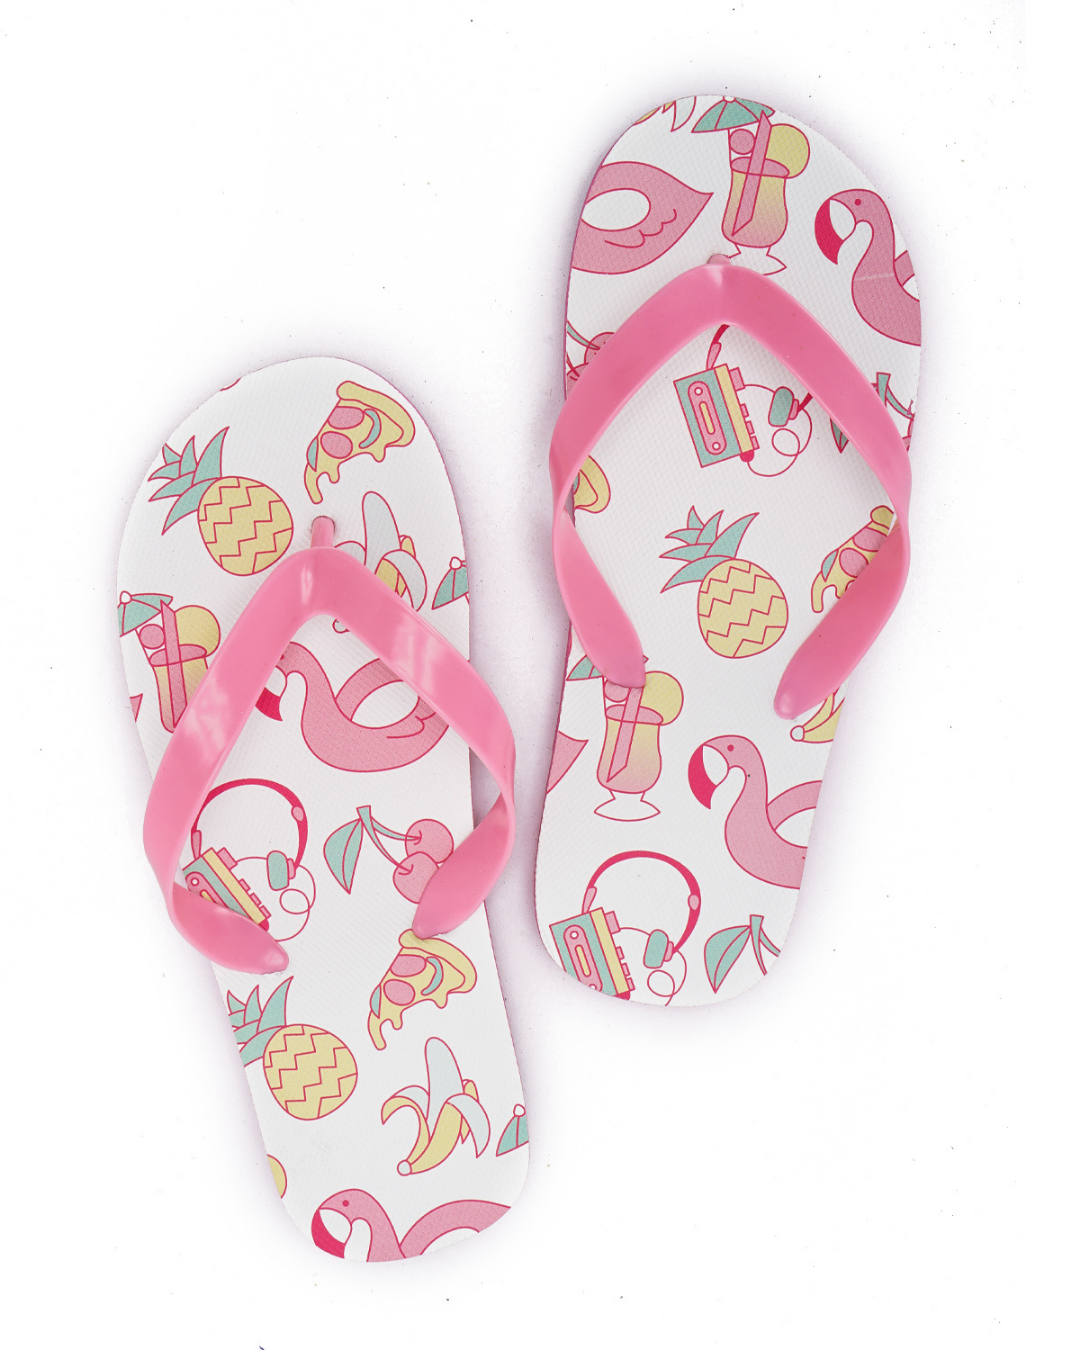 My kids' slippers are pineapple and flamingo